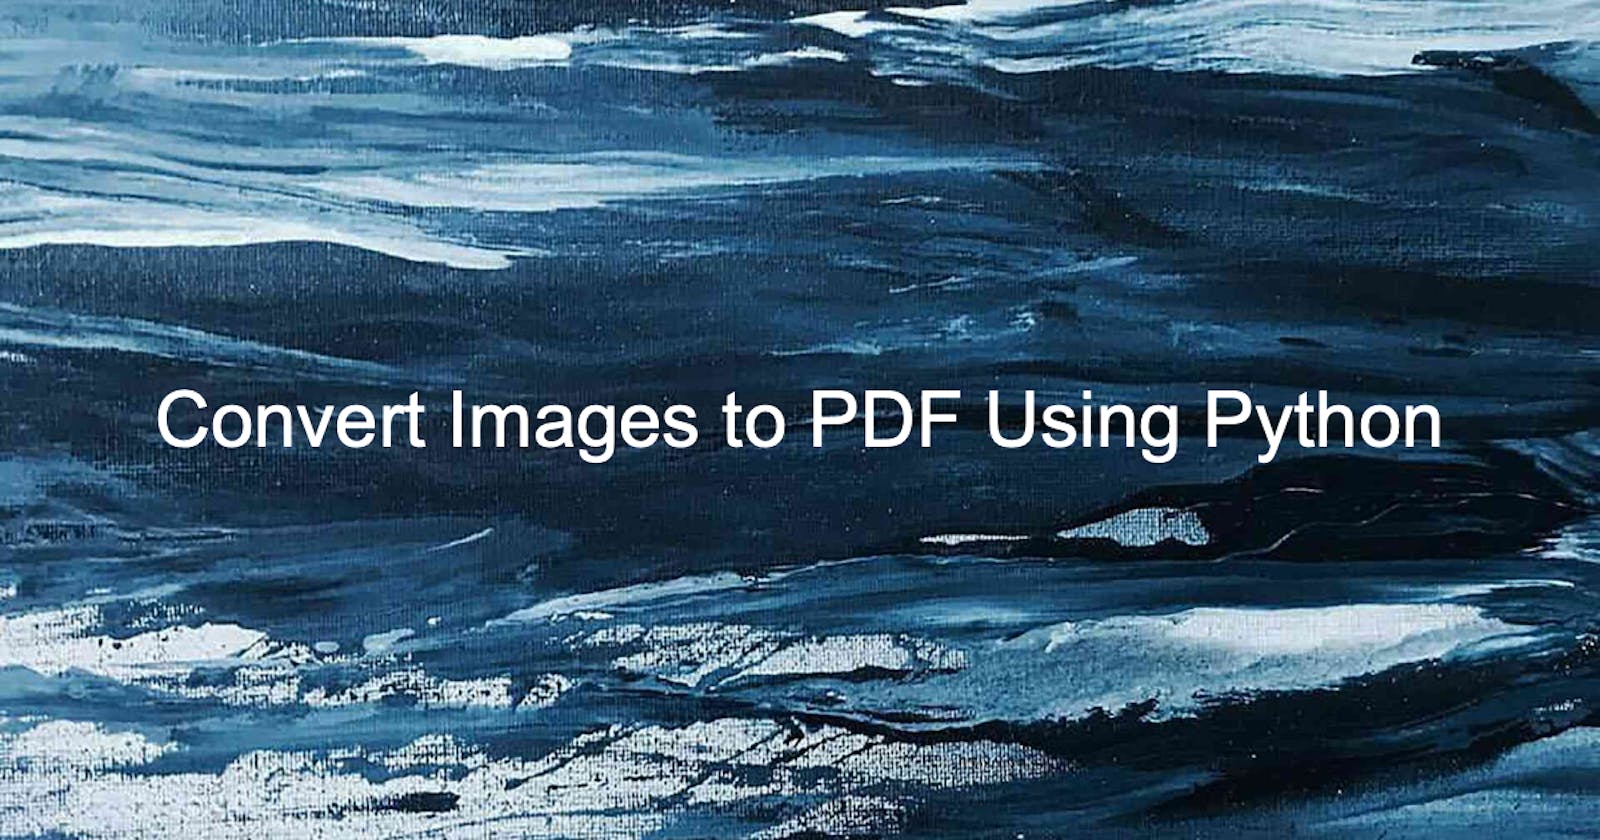 Convert Images to PDF in Python